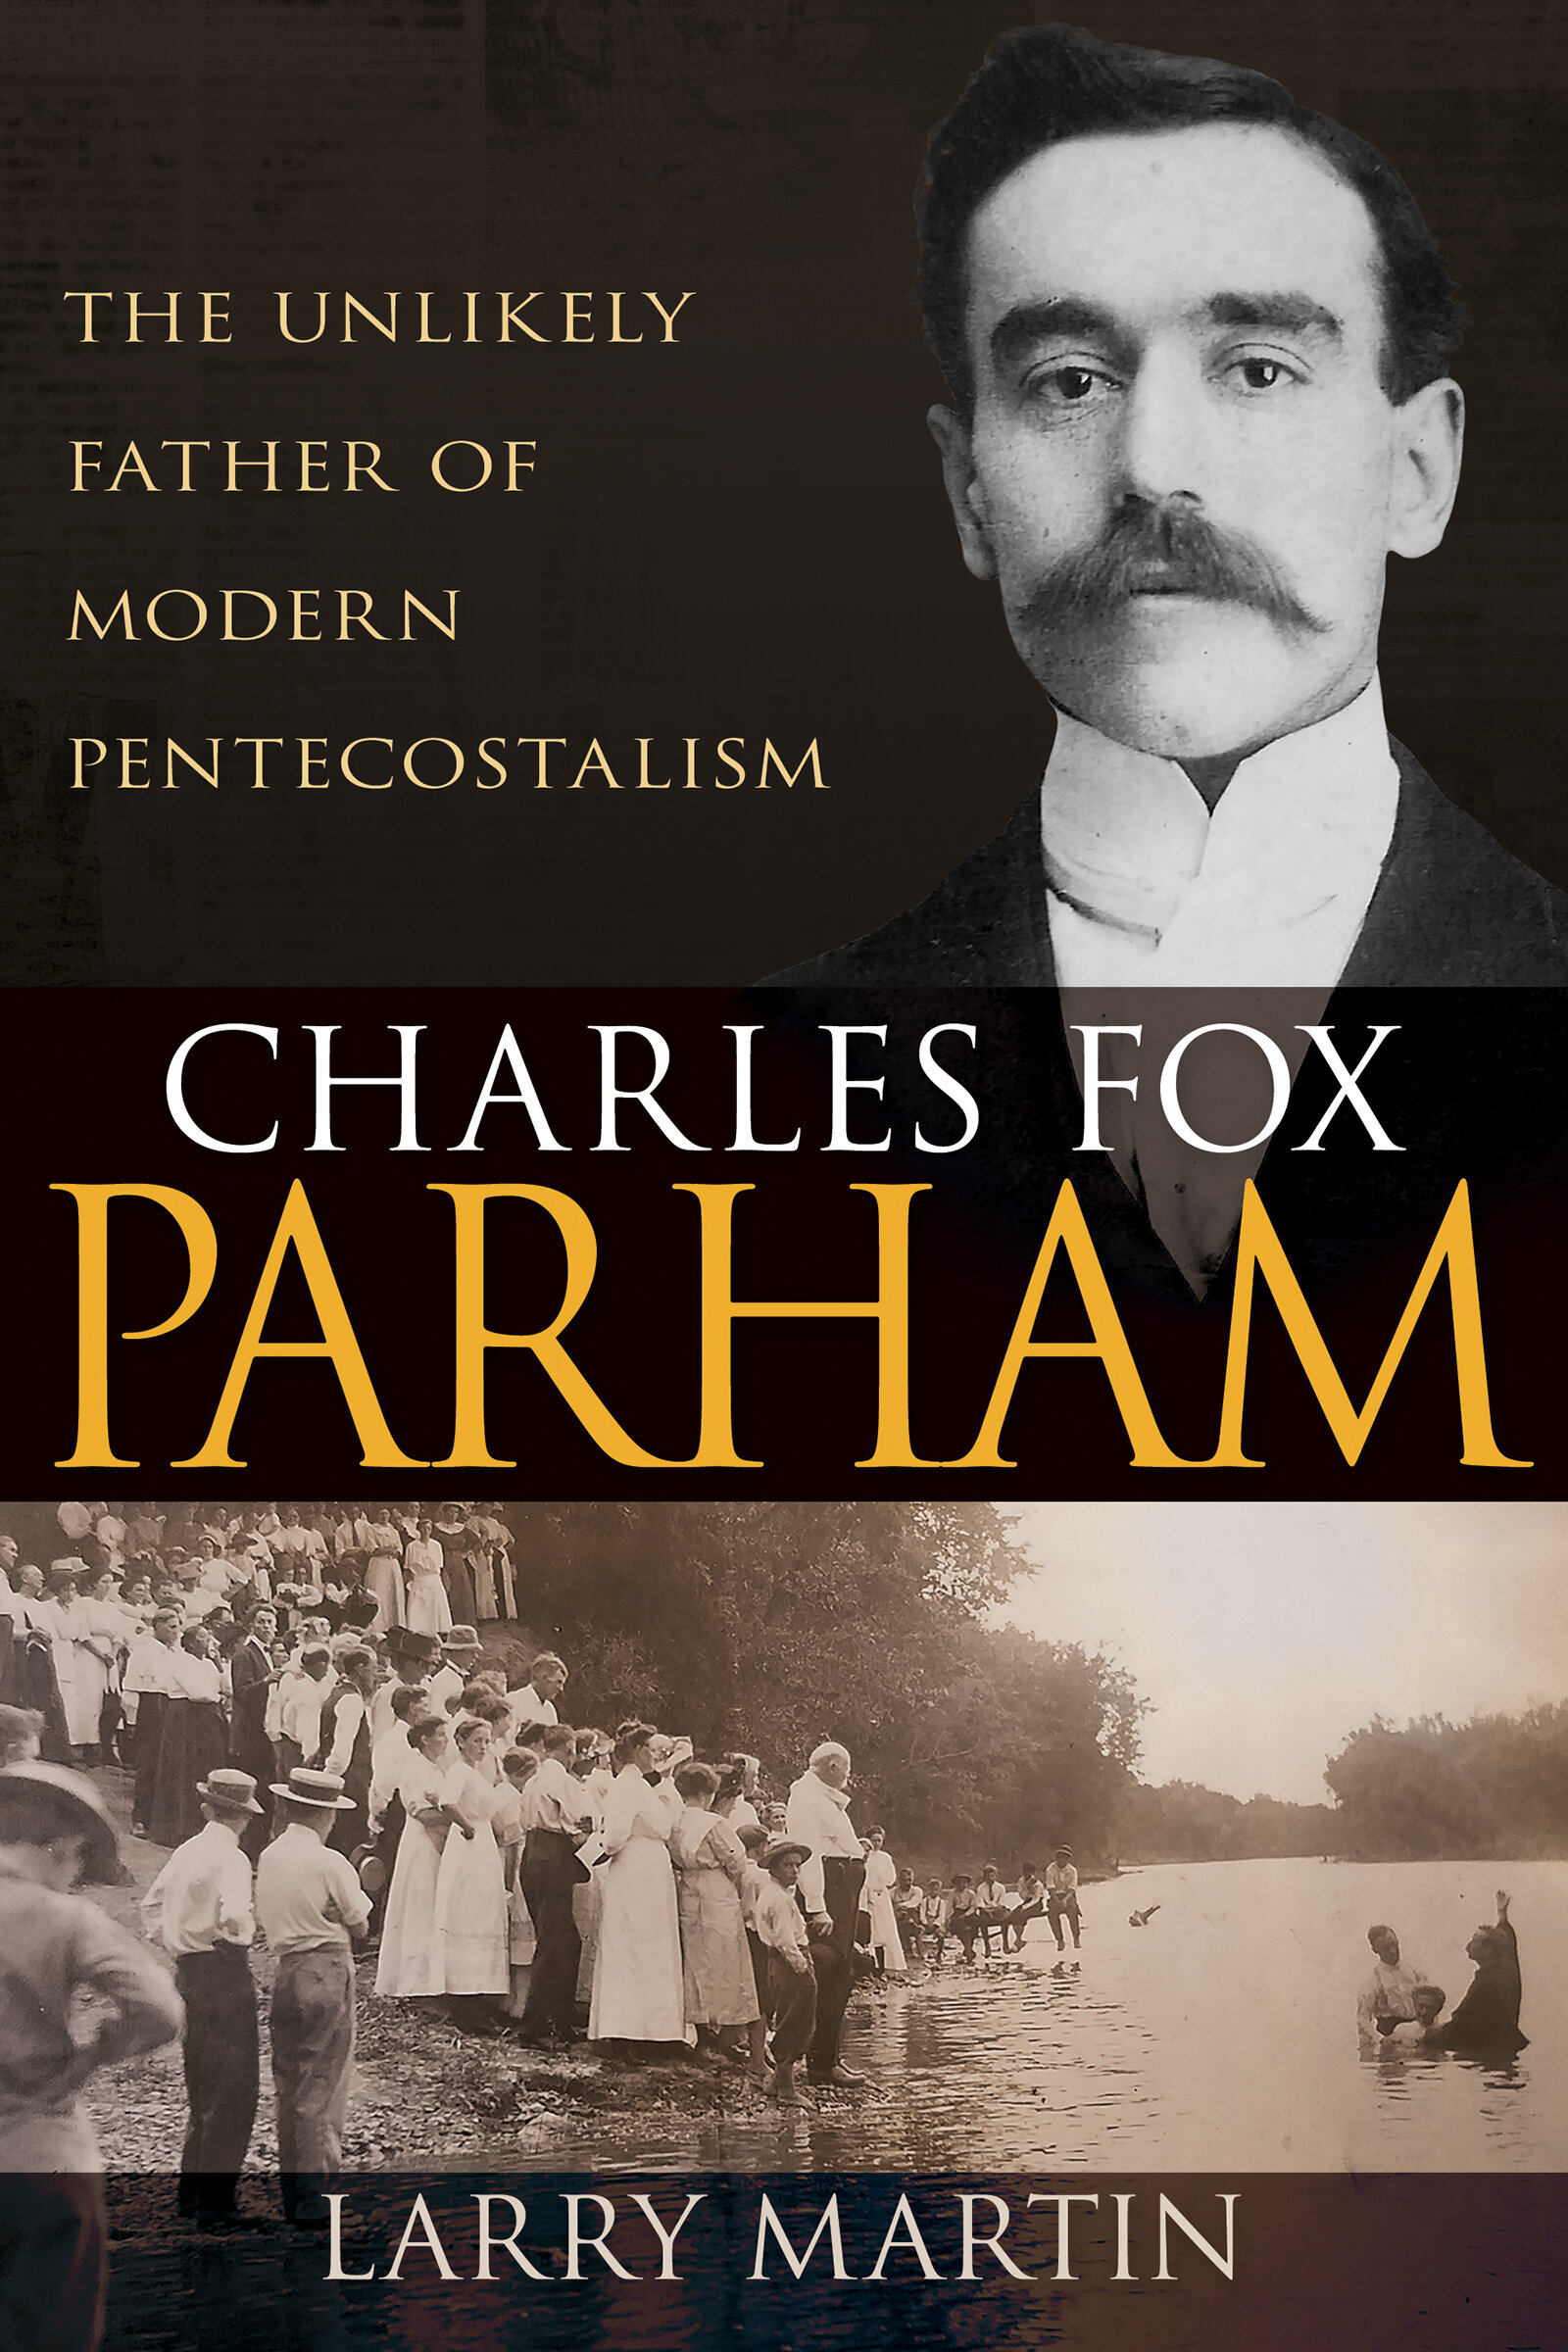 Charles Fox Parham: The Unlikely Father of Modern Pentecostalism